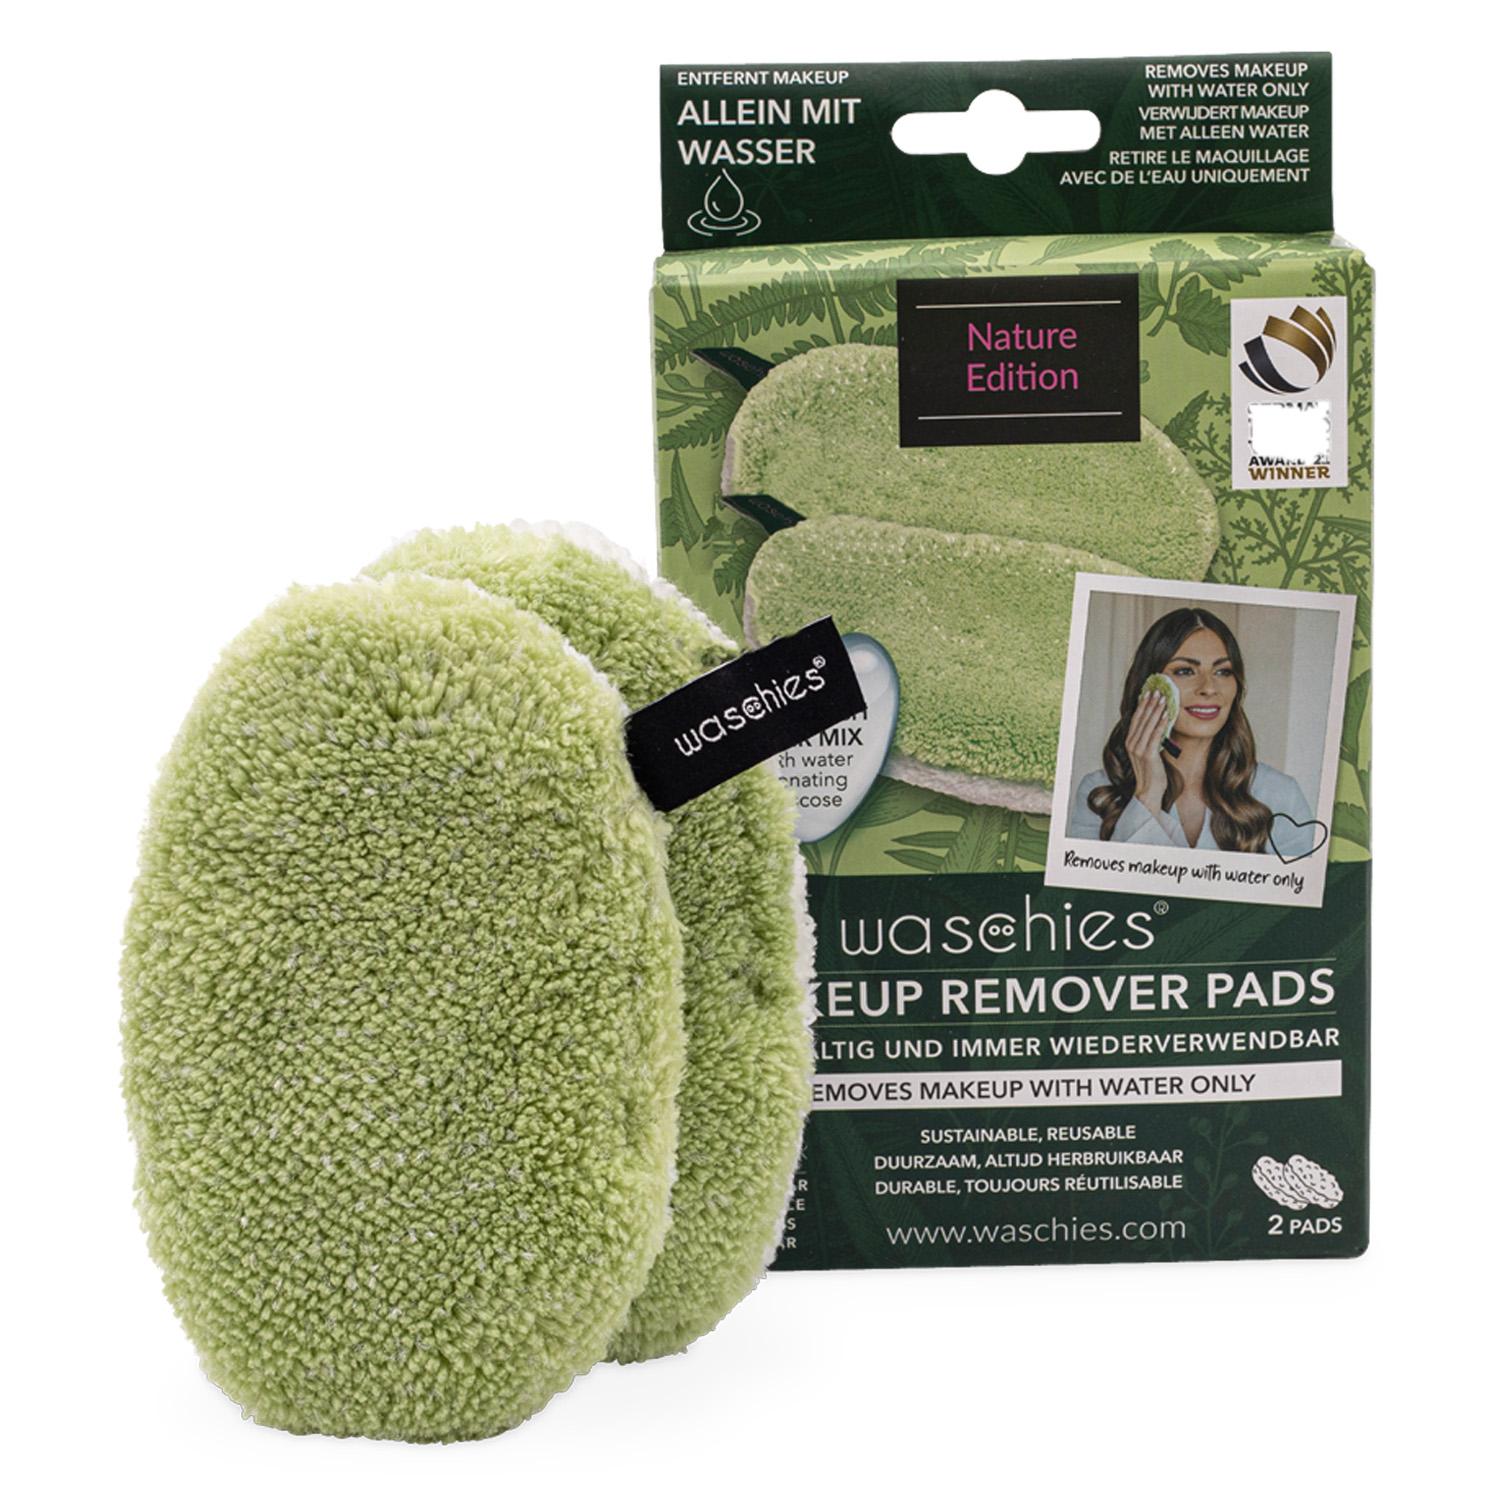 Waschies Faceline - Make-up removal pad & wash Nature-Edition